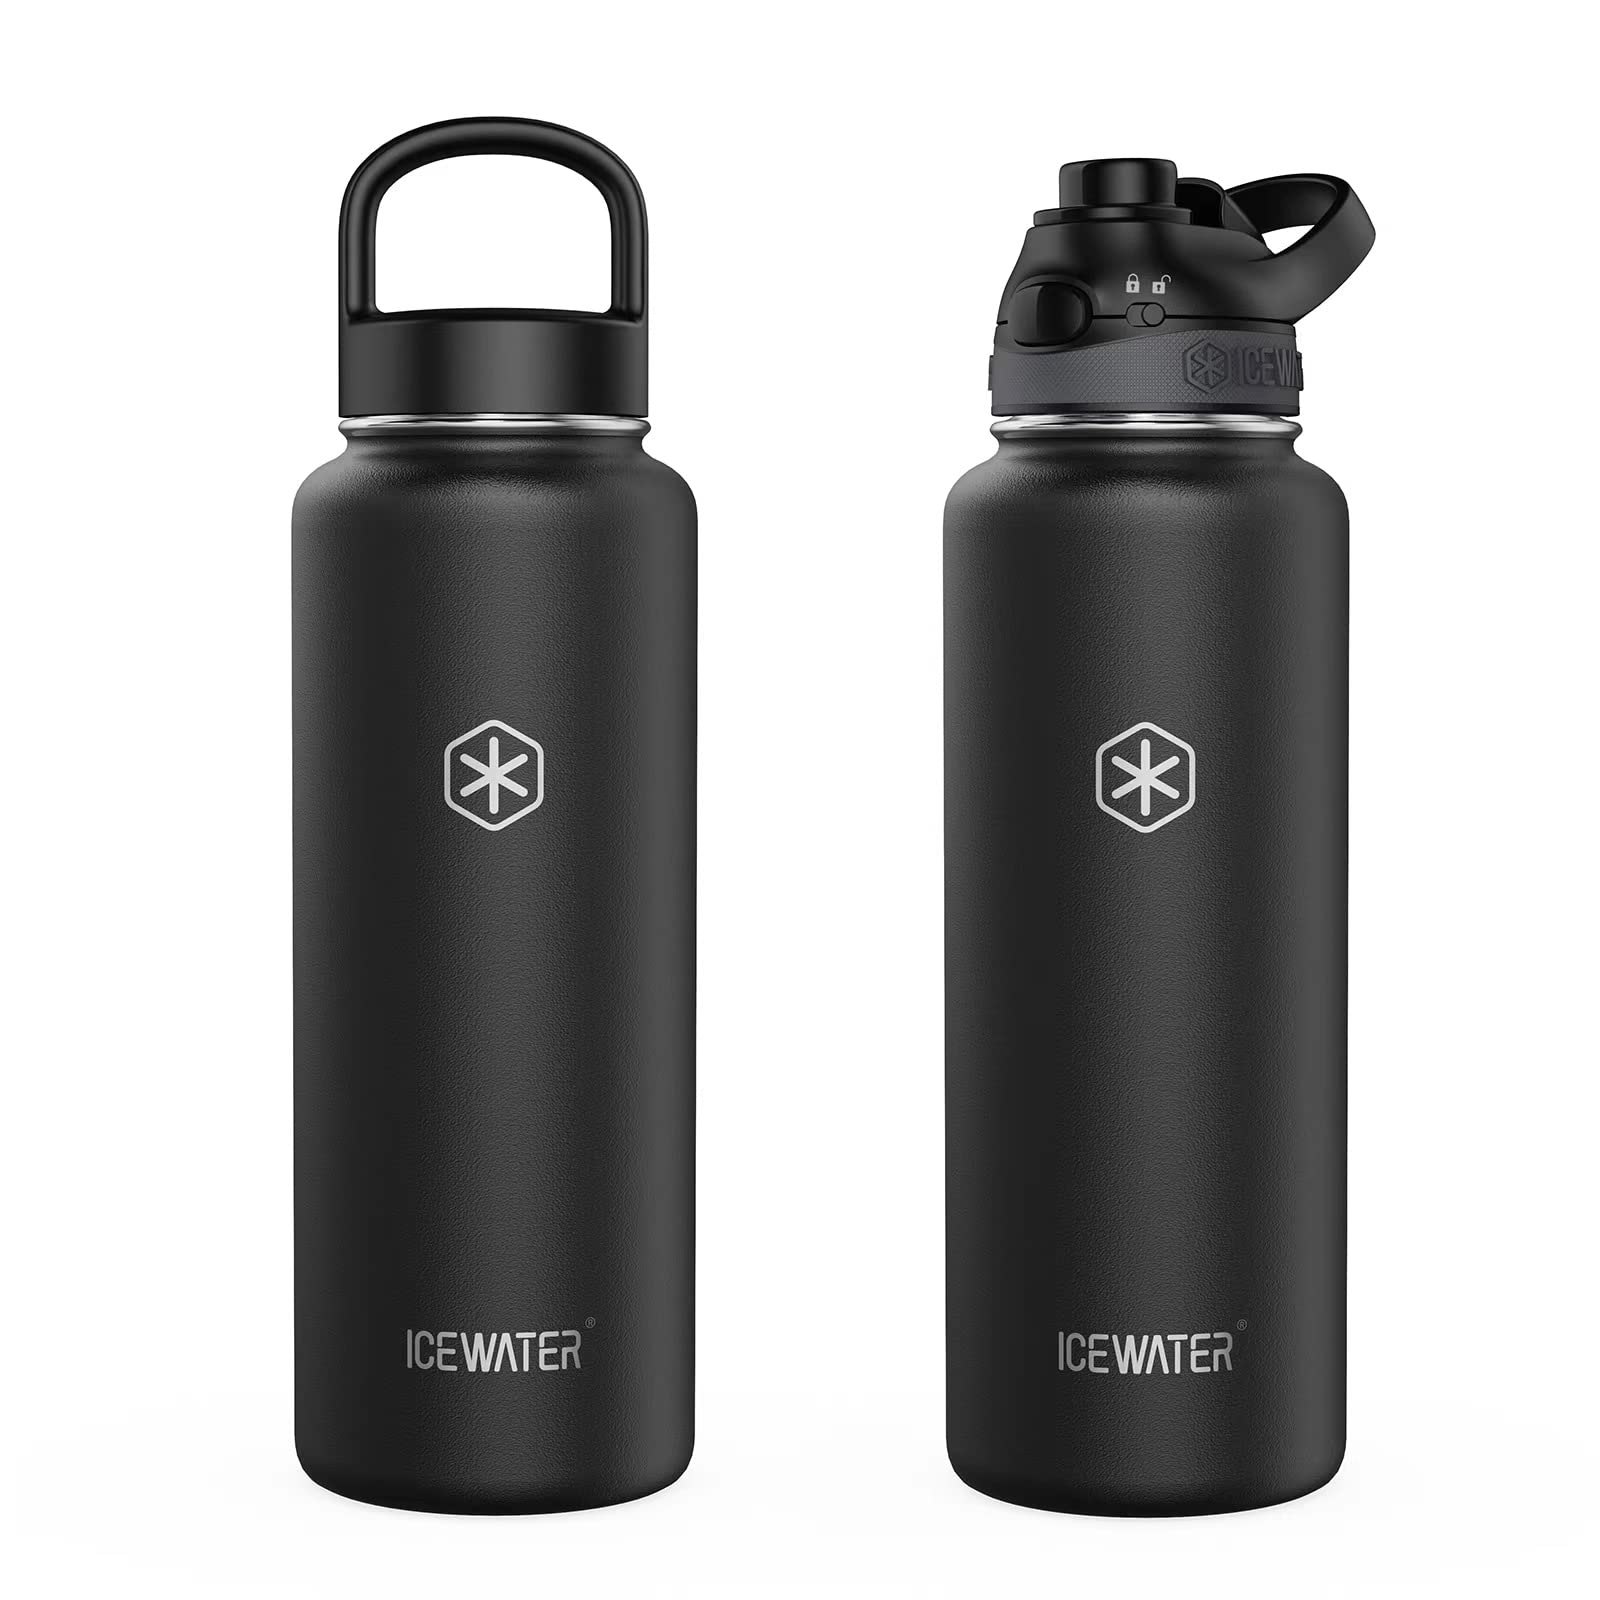  ICEWATER-40 oz, Insulated Water Bottle With Spout Lid and Carry  Handle, Leakproof Lockable Lid, One-hand Operation, Double Walled Vacuum Stainless  Steel BPA-Free (40 oz, Bubble Gum) : Sports & Outdoors